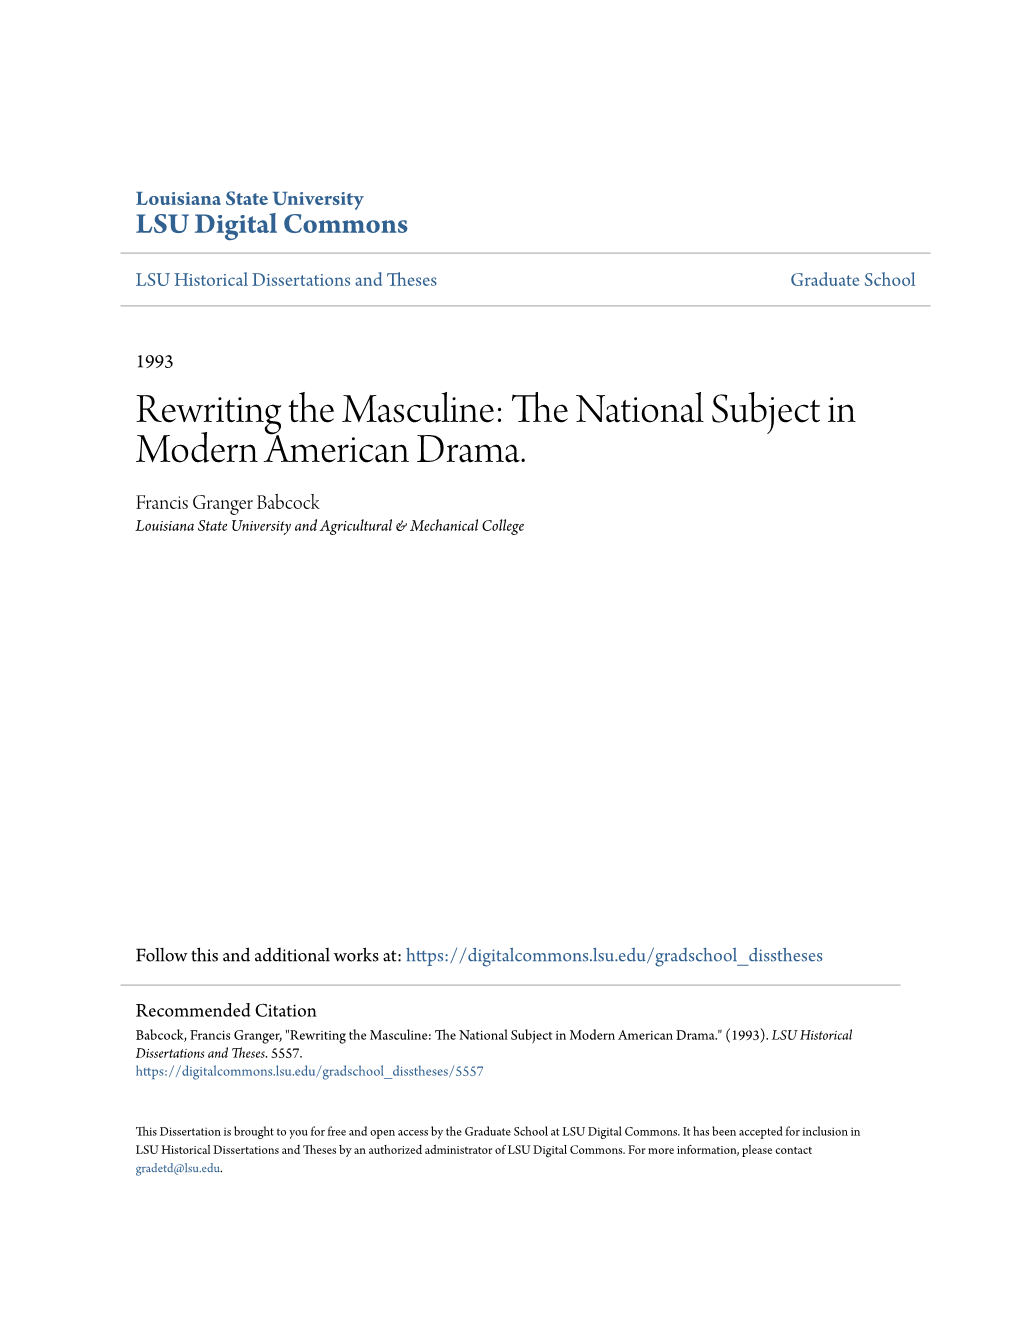 Rewriting the Masculine: the National Subject in Modern American Drama